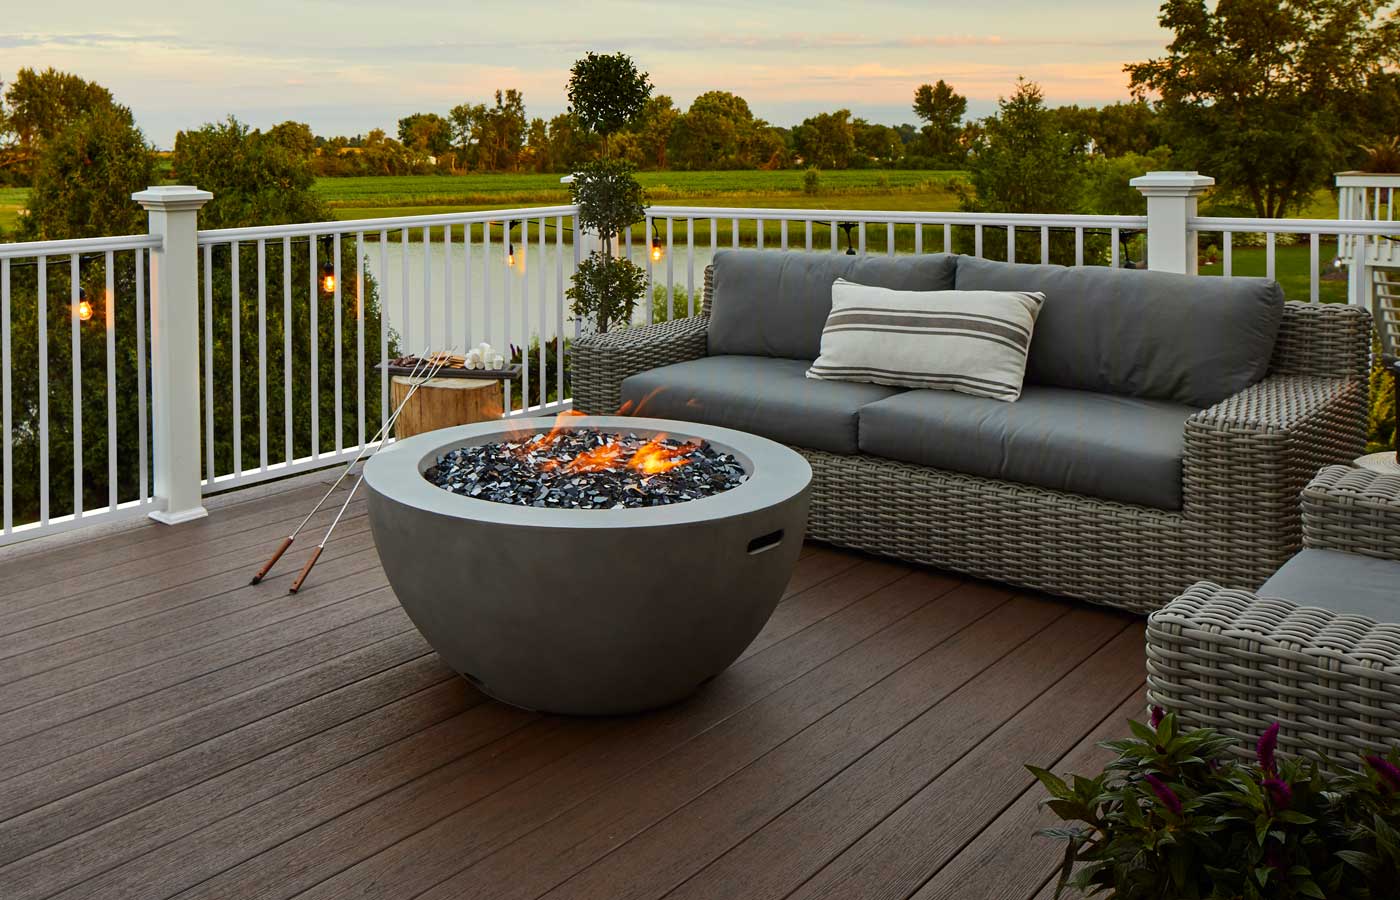 A dark brown composite deck with a white railing looks out at the last gasp of the sunset, firepit already lit